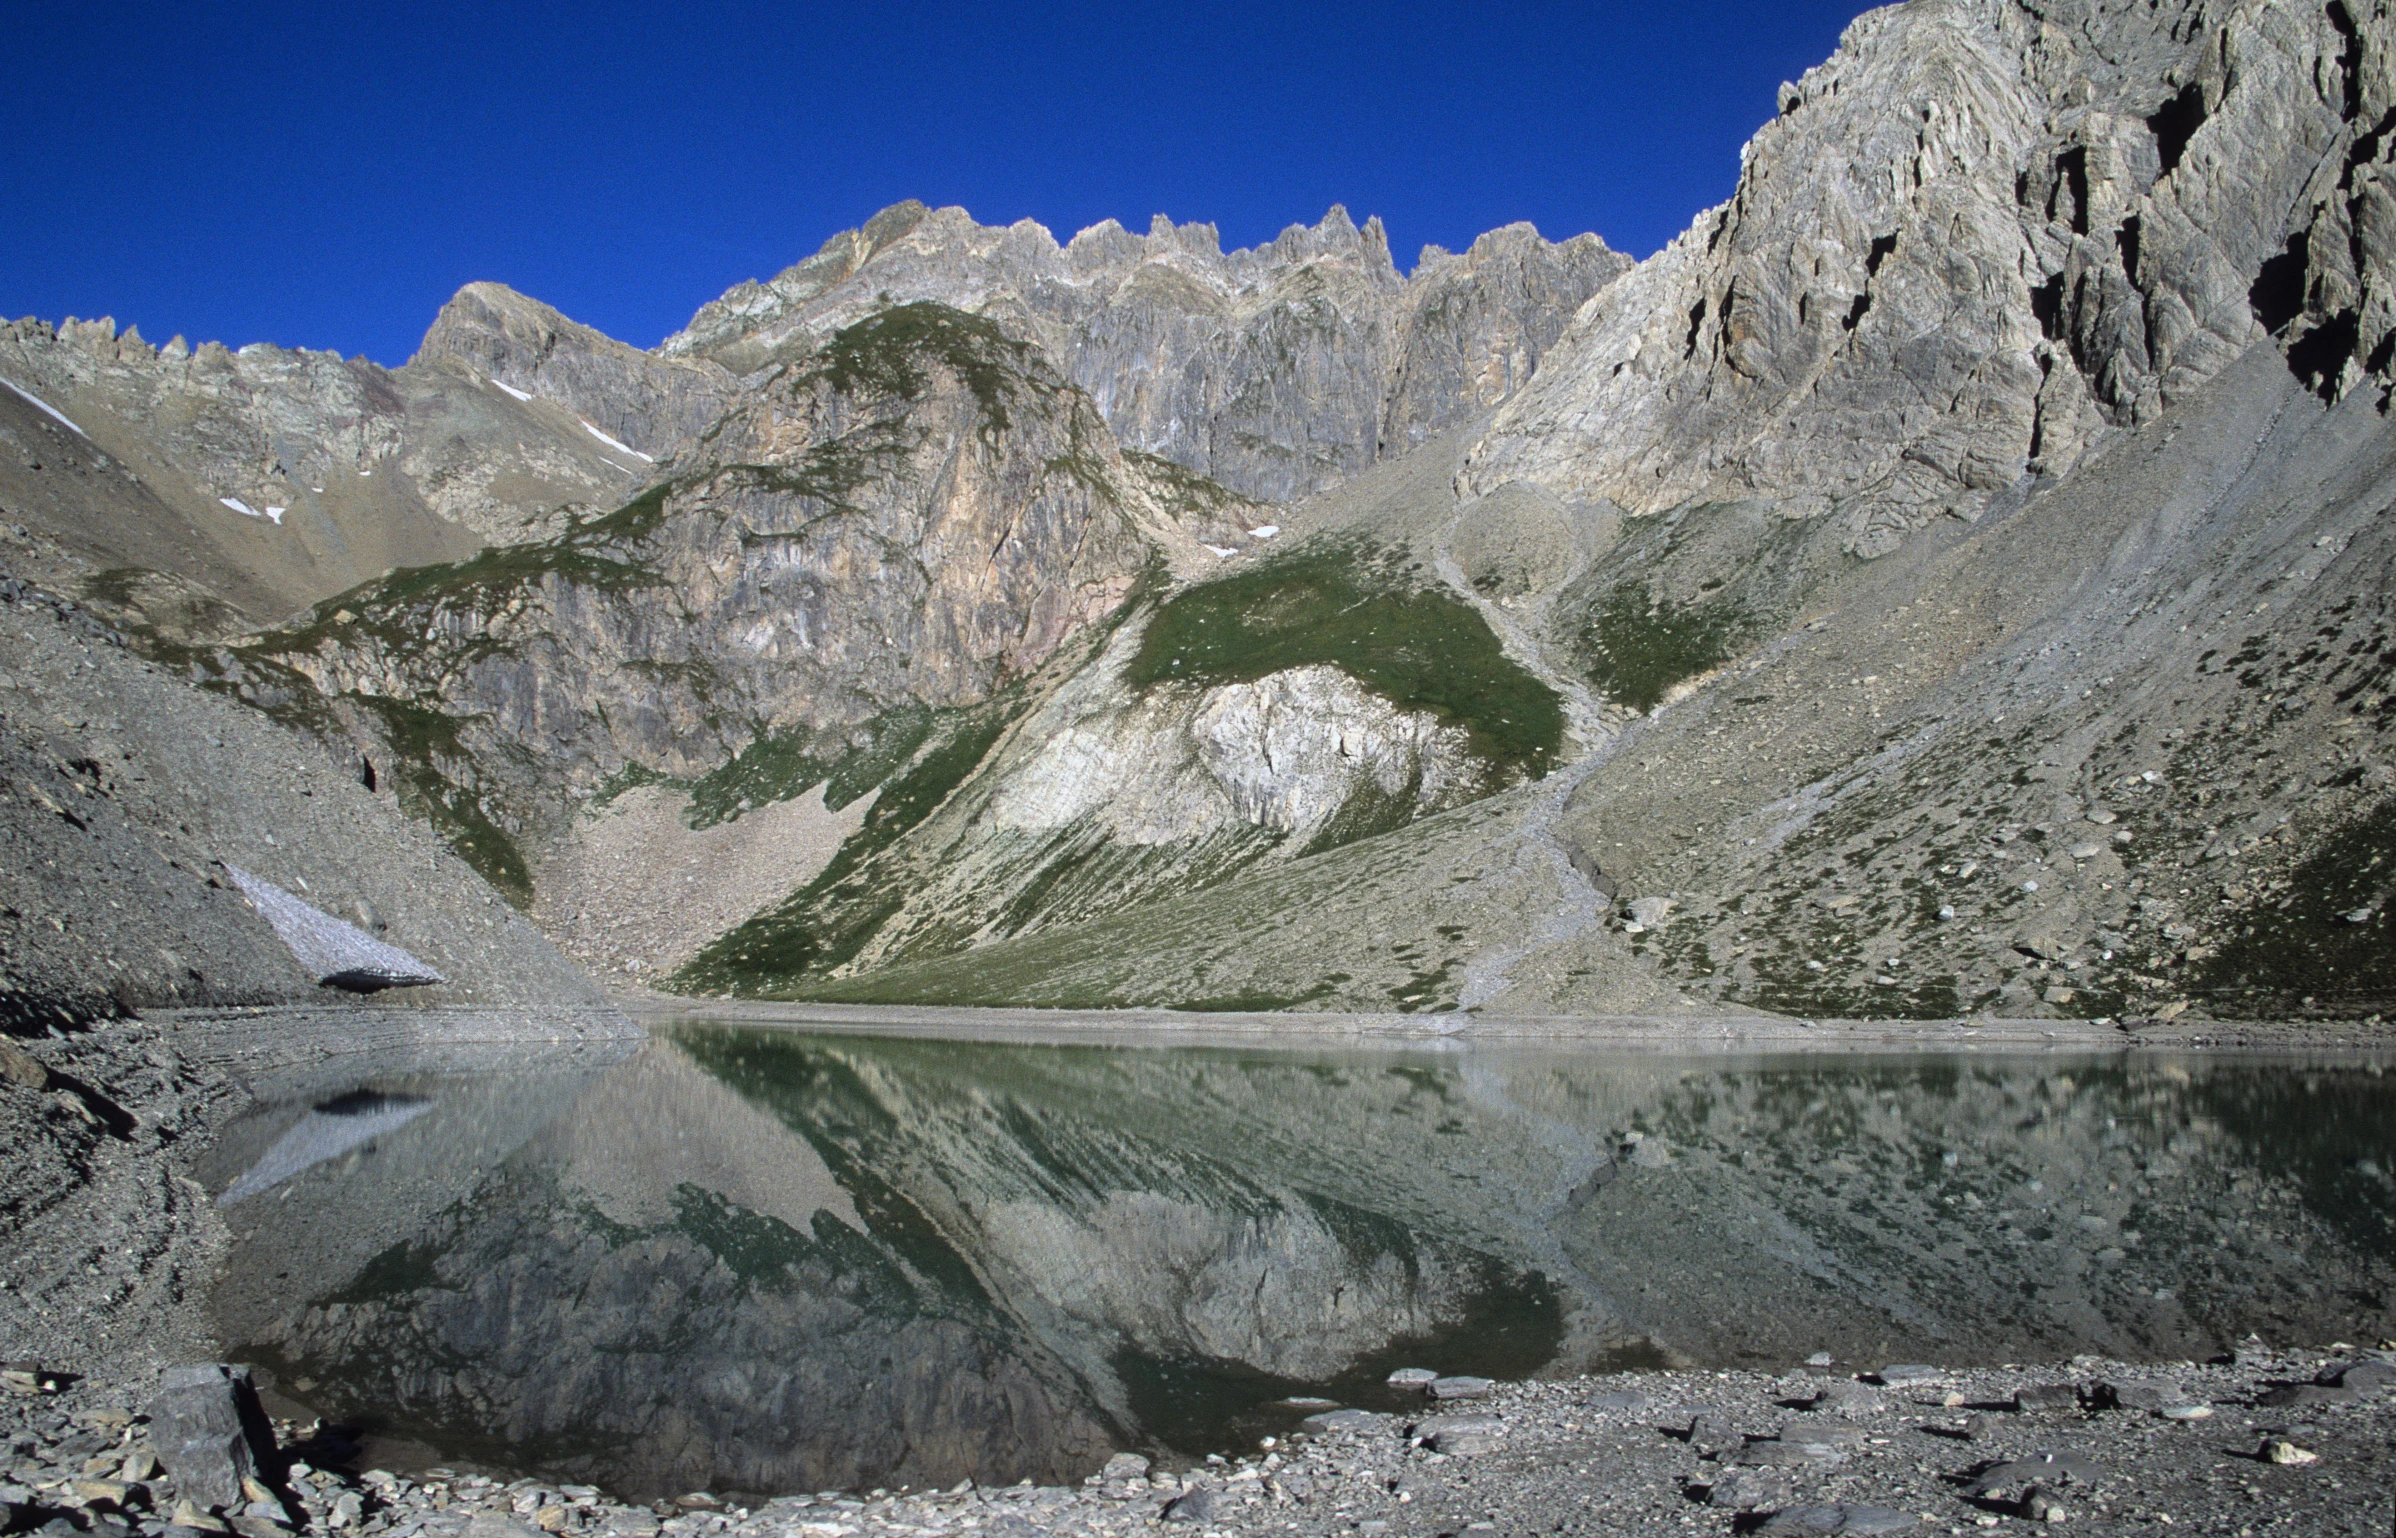 a mountain lake with no clouds in the sky